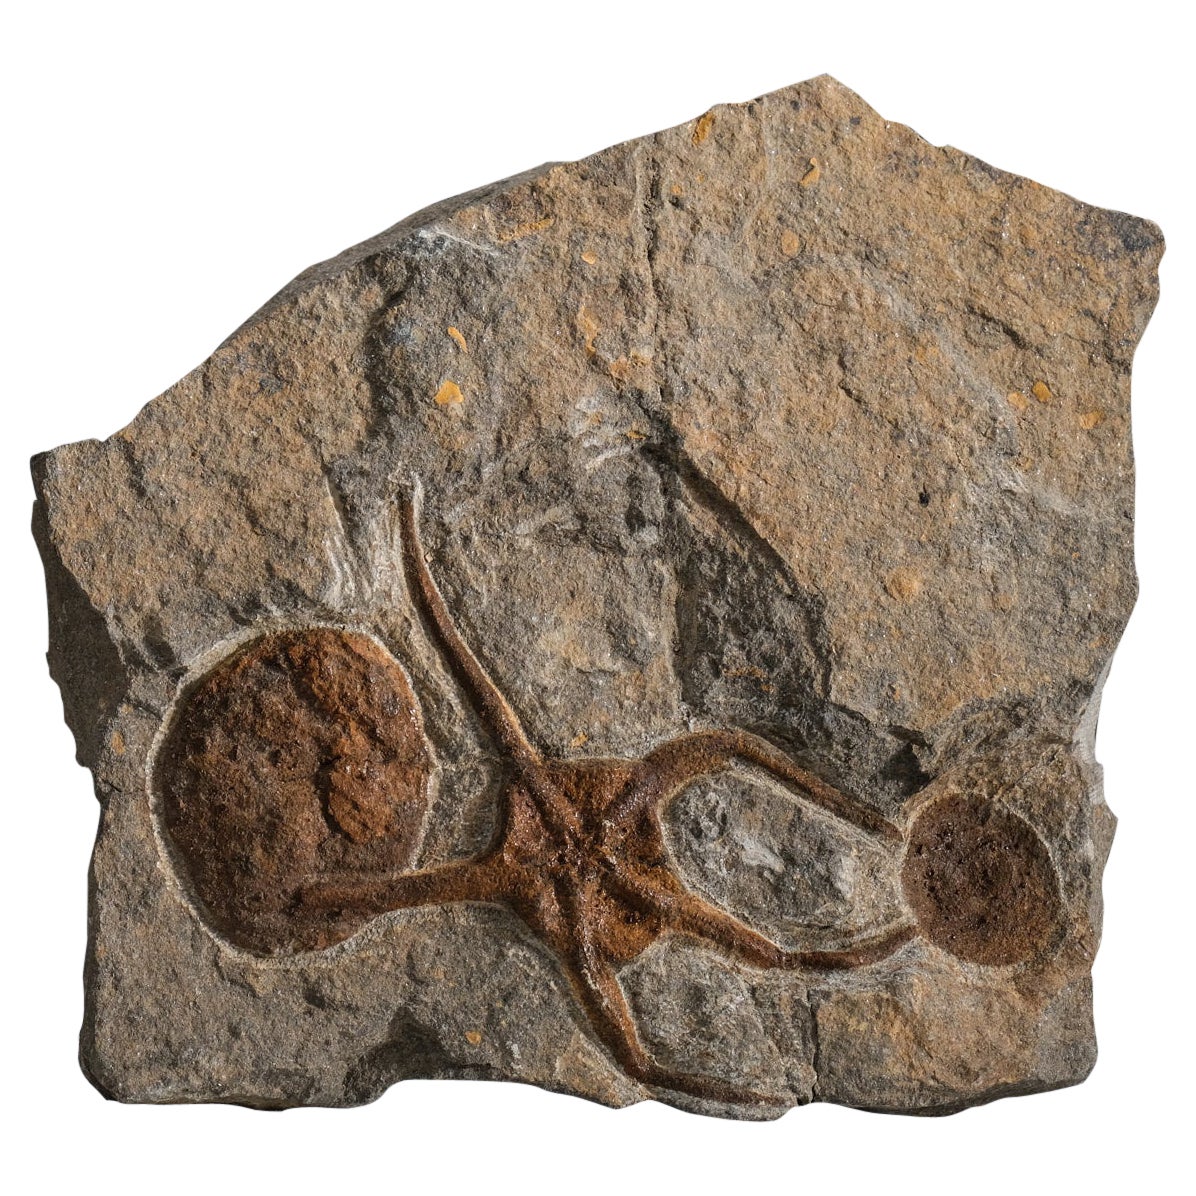 Ophiuroidea Brittle Star Fossil (1.2 lbs) For Sale